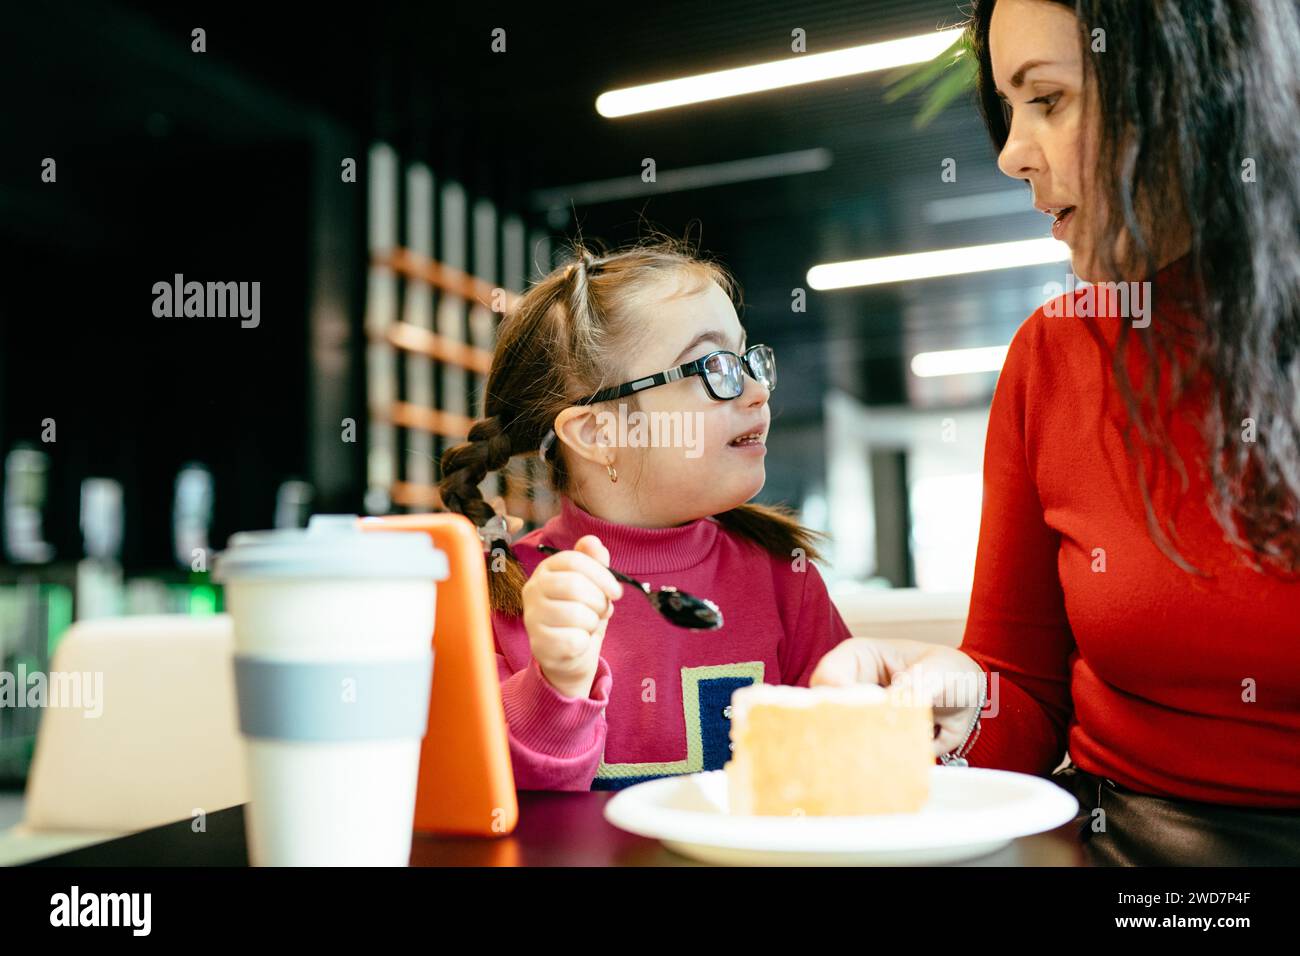 Portrait of happy mother smiling to each other cute girl with down syndrome eating cake in cafe. Happy family moments concept. Stock Photo